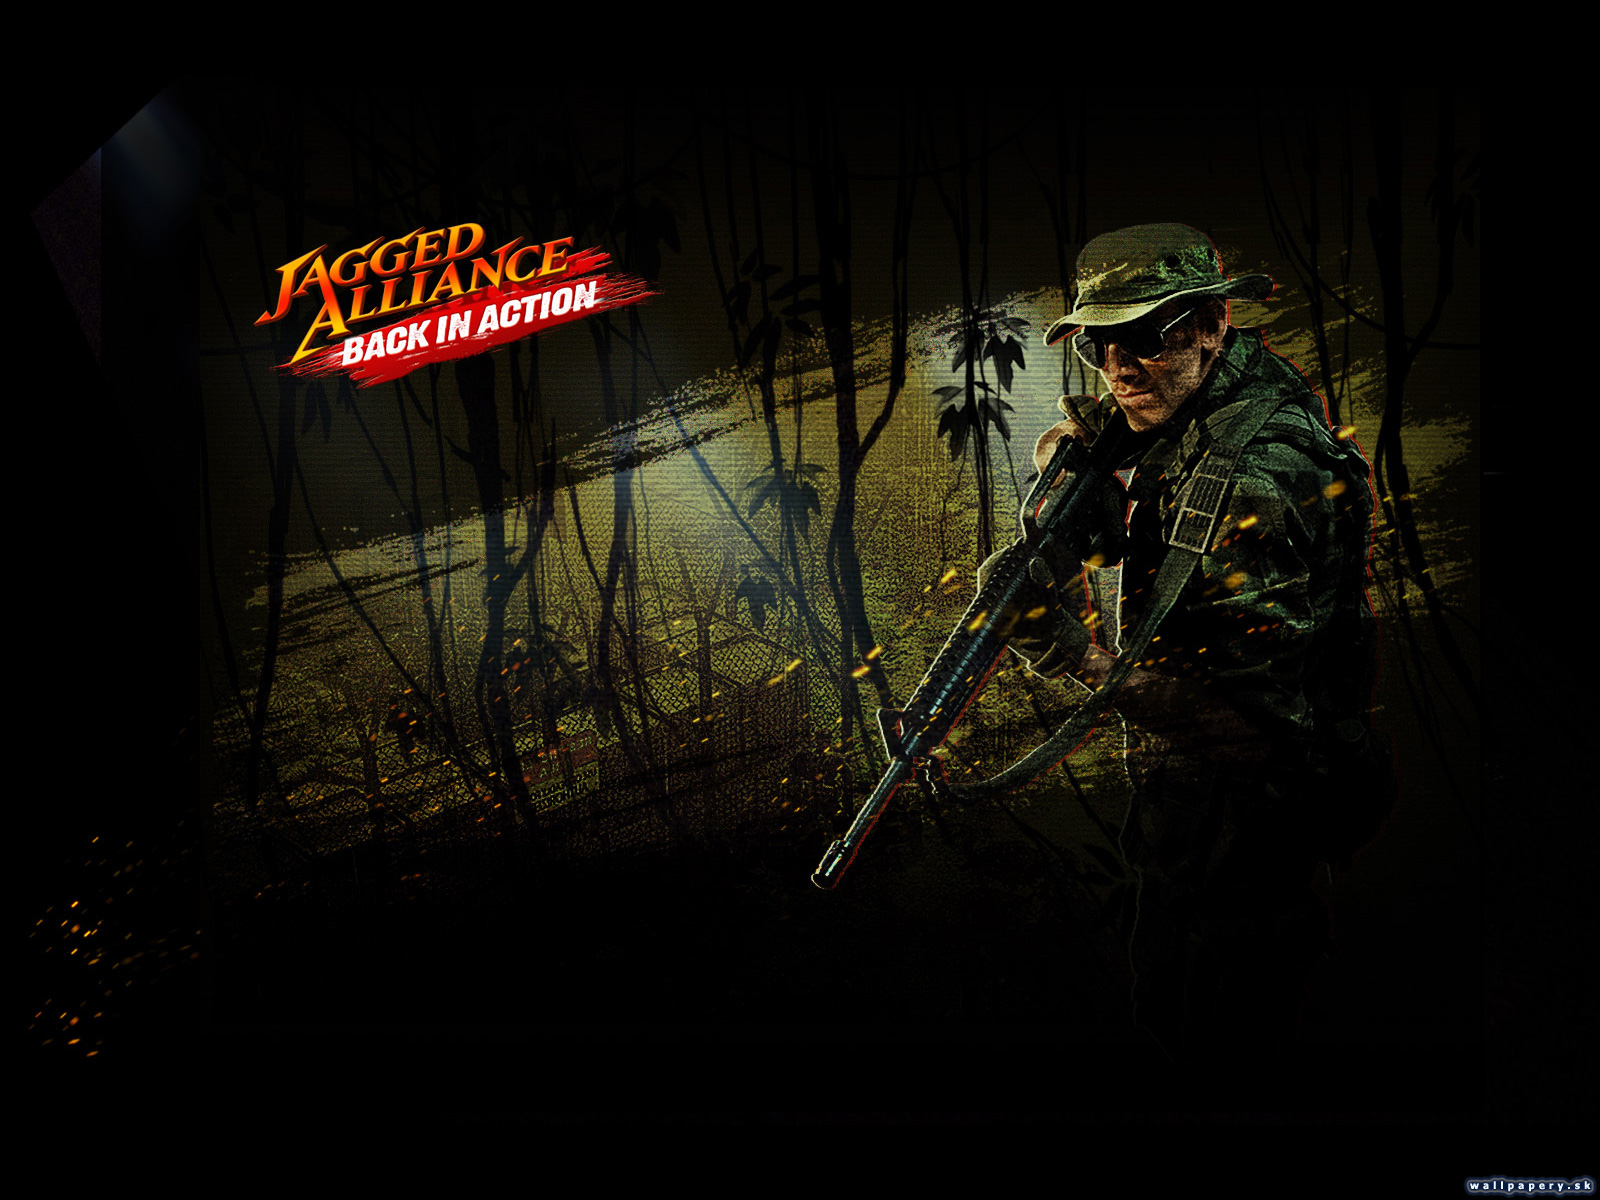 Jagged Alliance: Back in Action - wallpaper 3